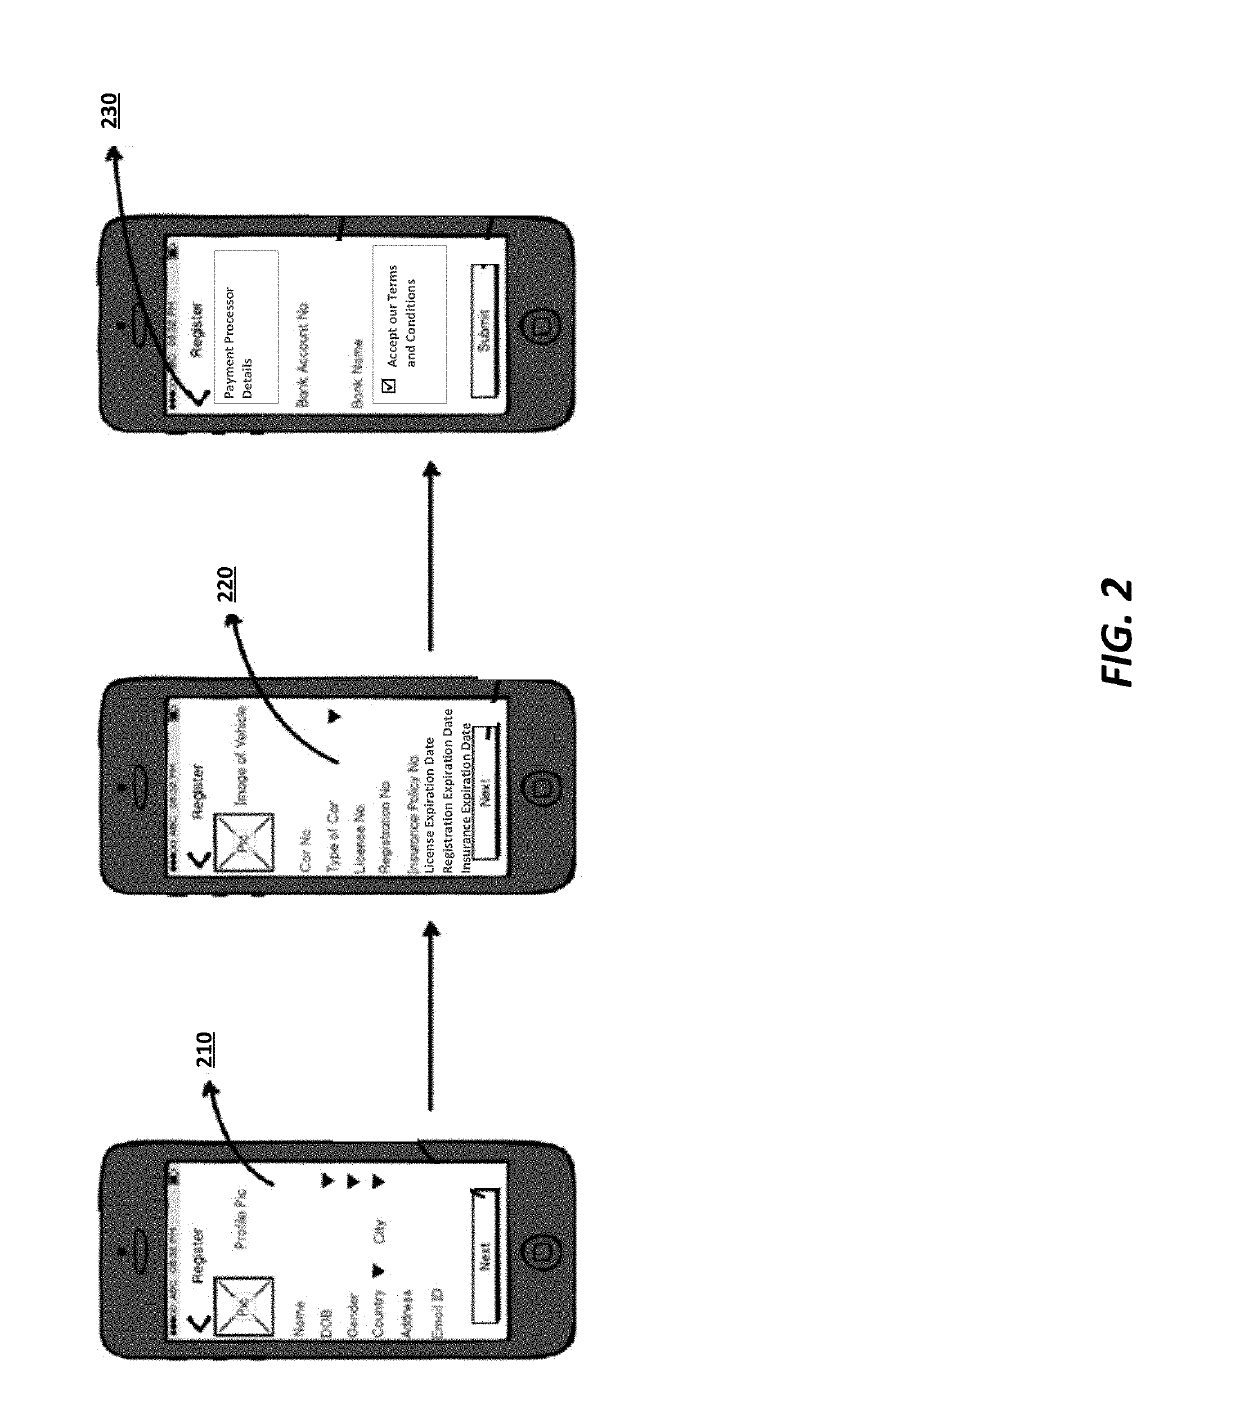 Method and system for ride shares involving hierarchical driver referrals